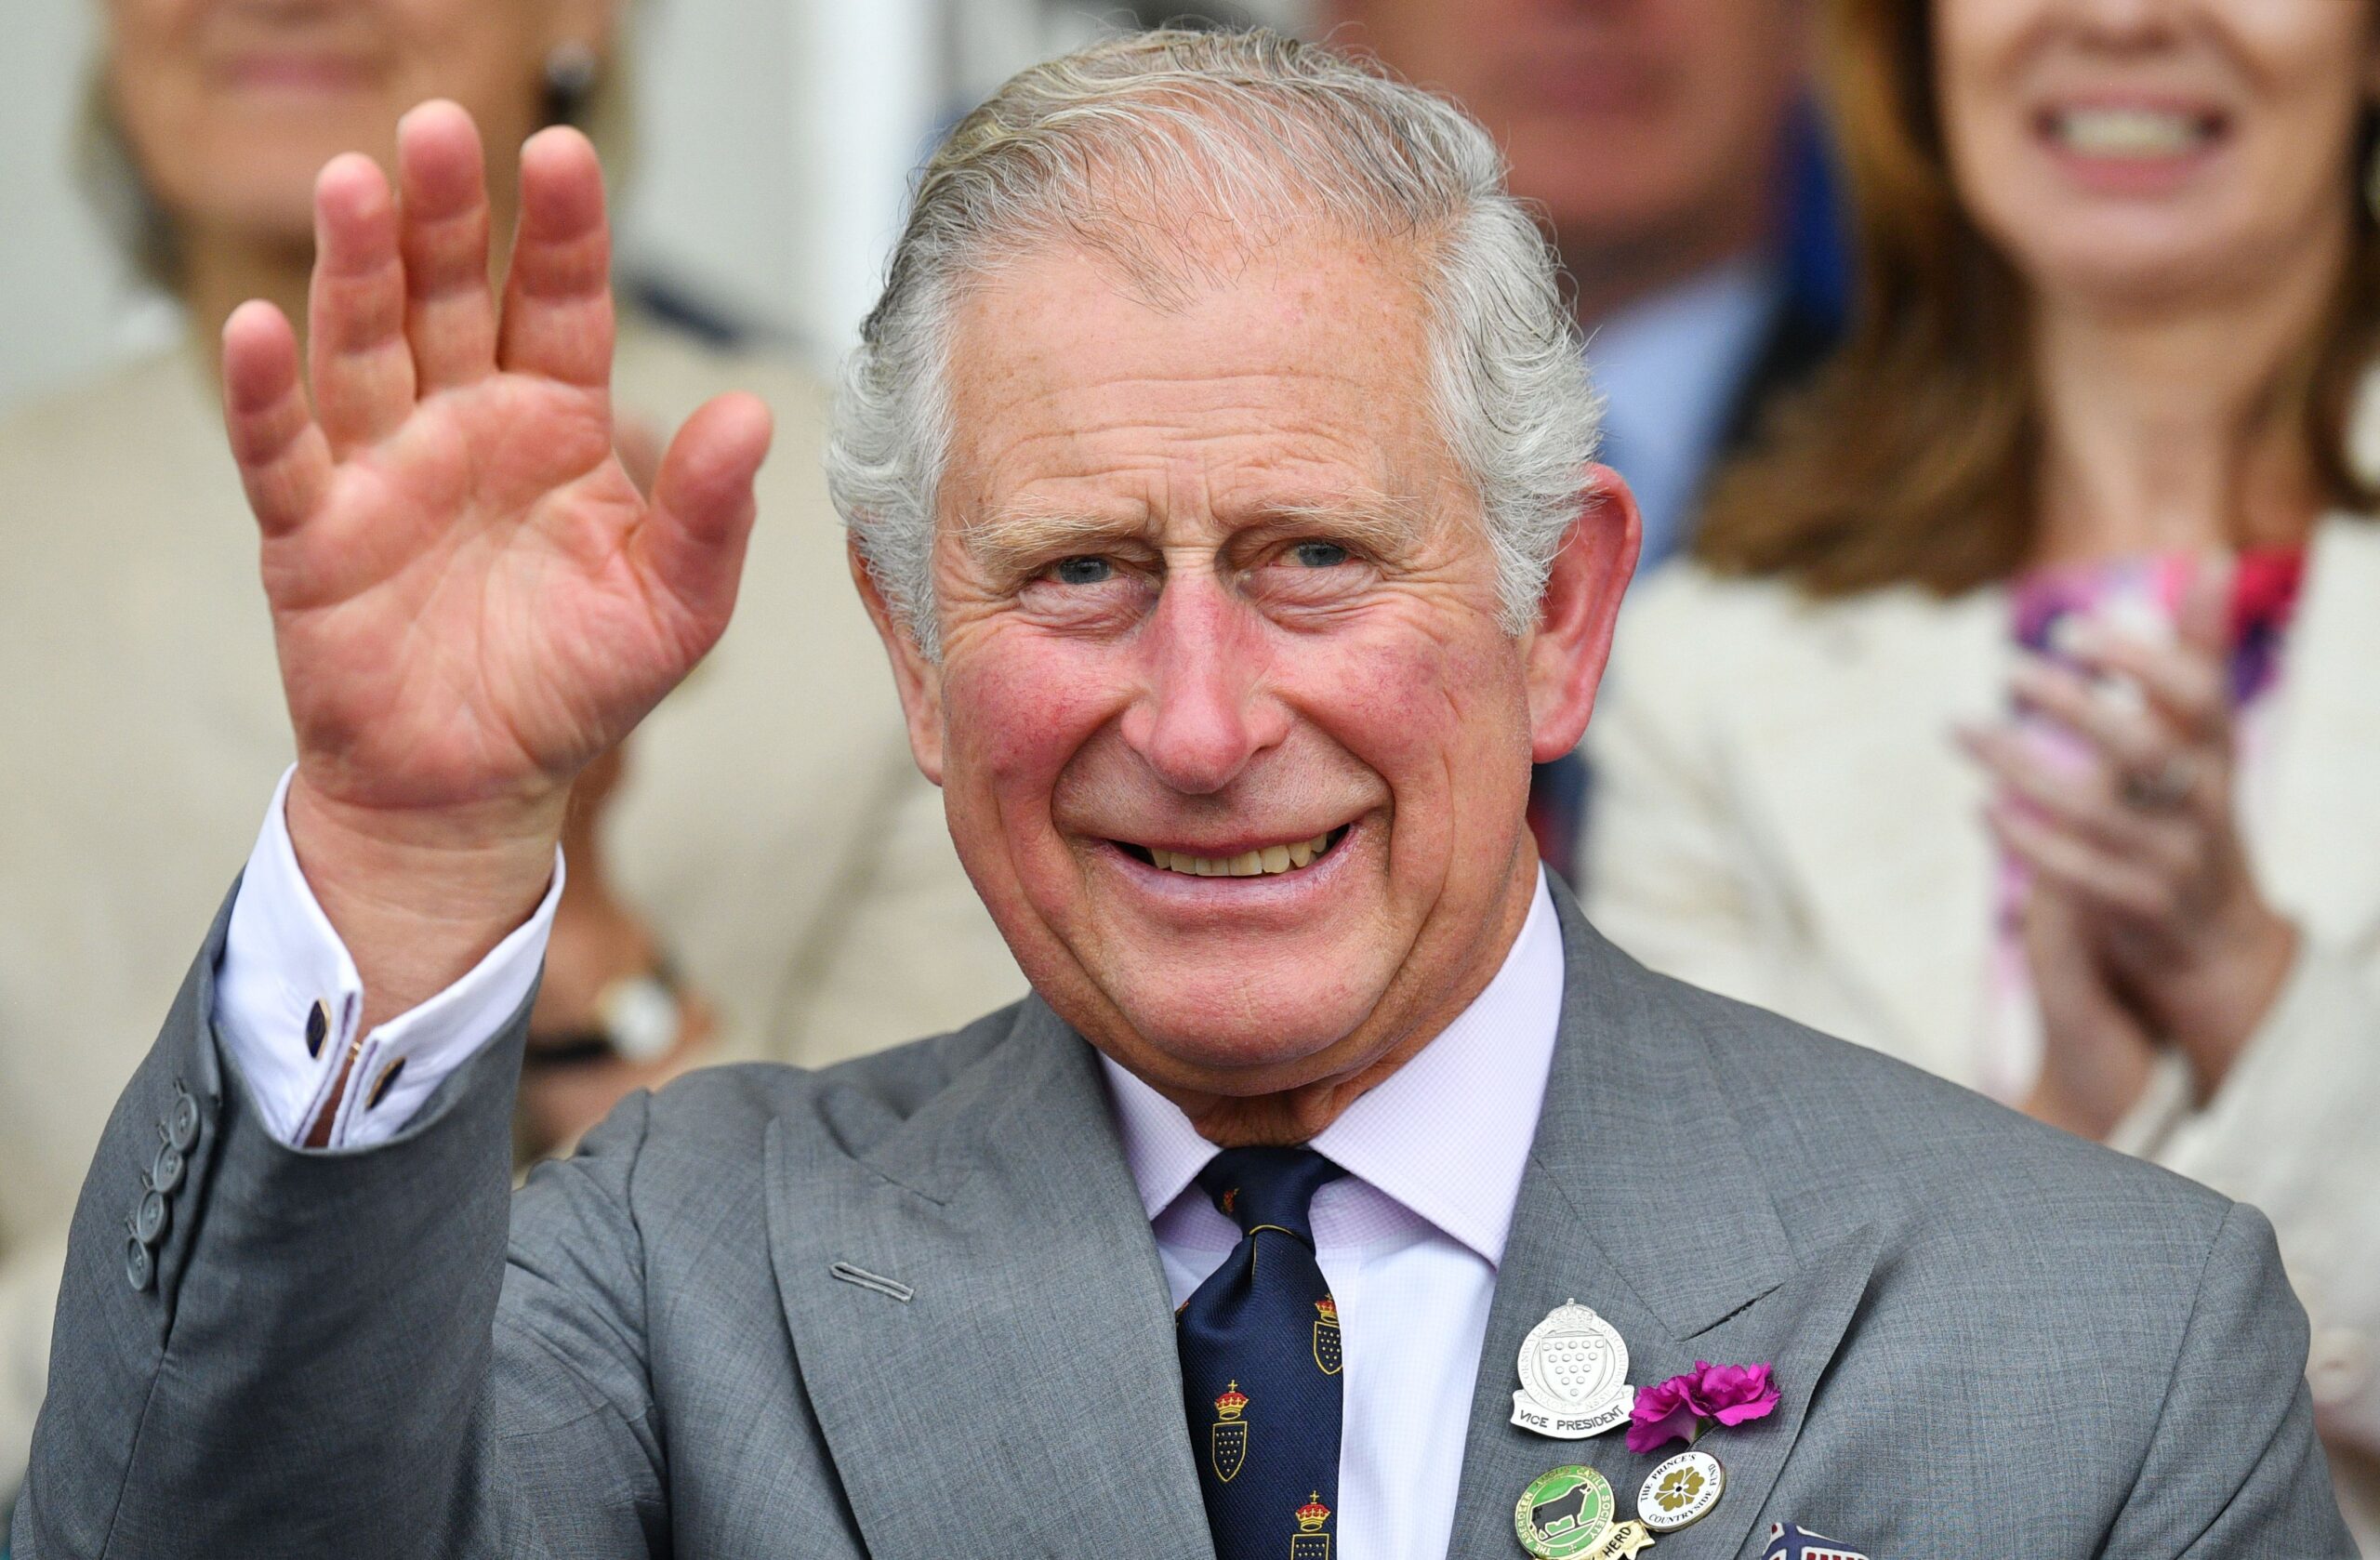 King Charles III waves as he attends the Royal Cornwall Show in Wadebridge, United Kingdom on June 7, 2018. | Source: Getty Images